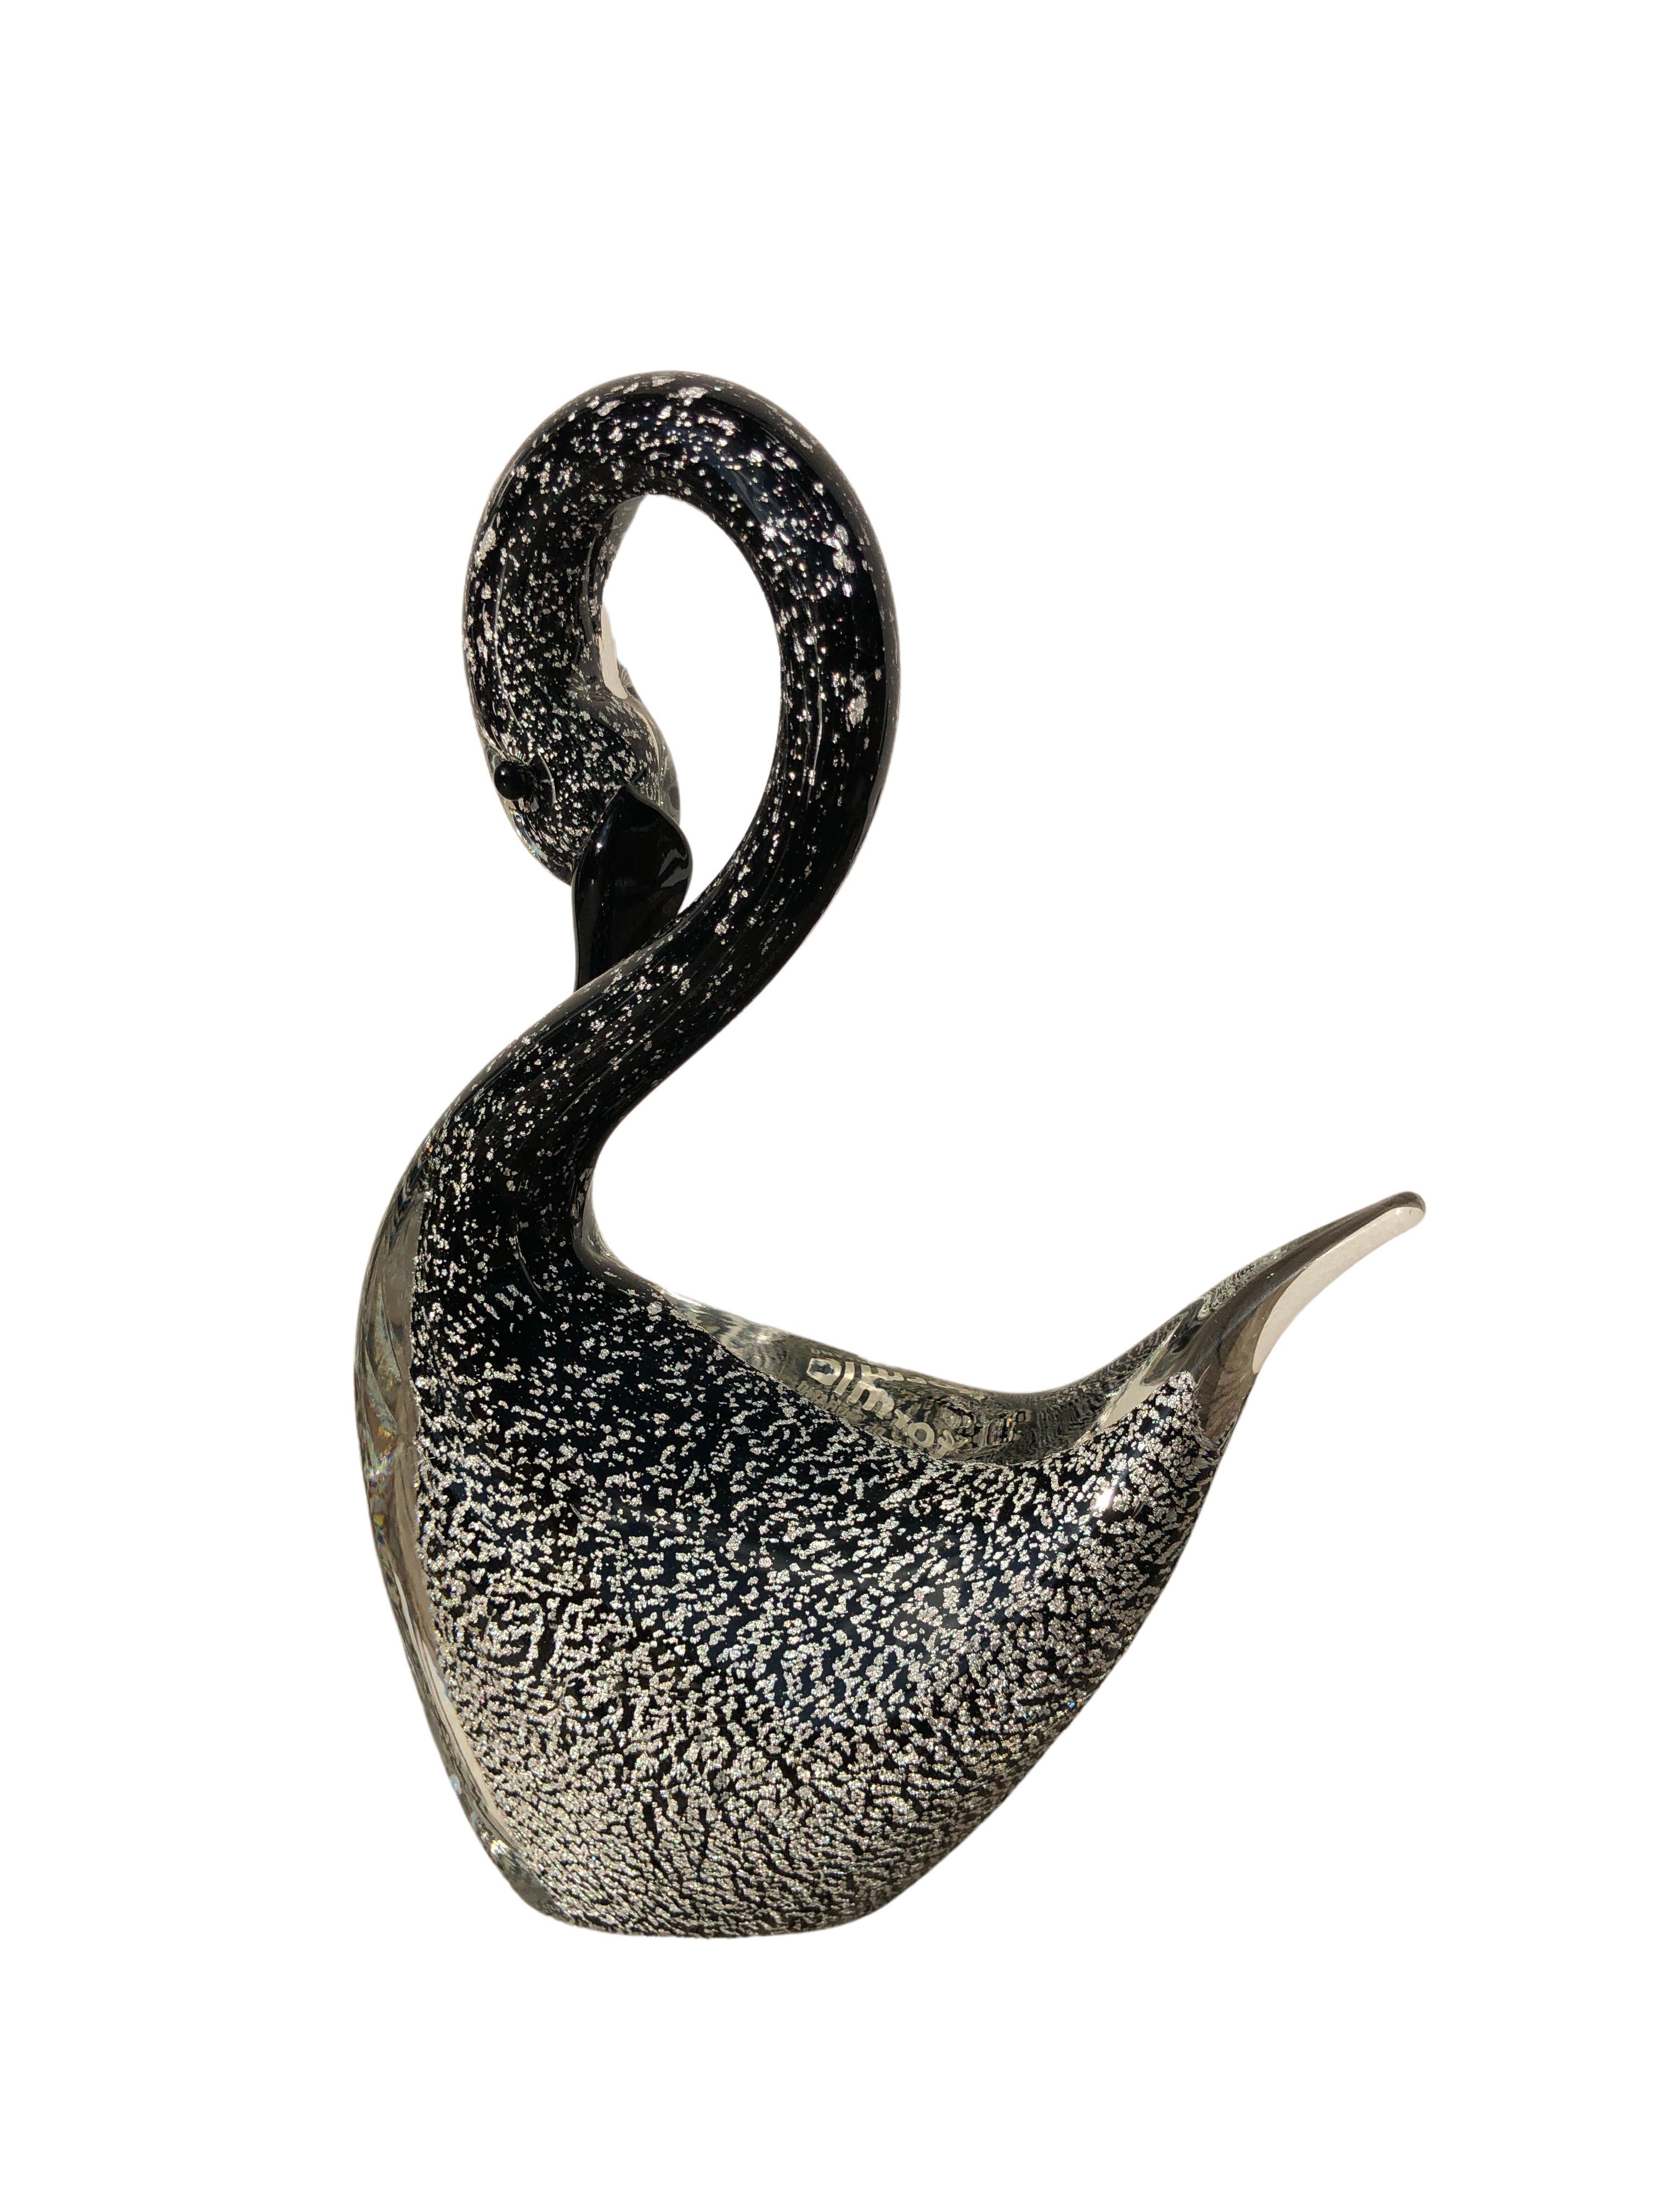 Mid-Century Modern Murano Art Glass Silver Flecked Swan Figurine by Formia, Italy, 1960s For Sale